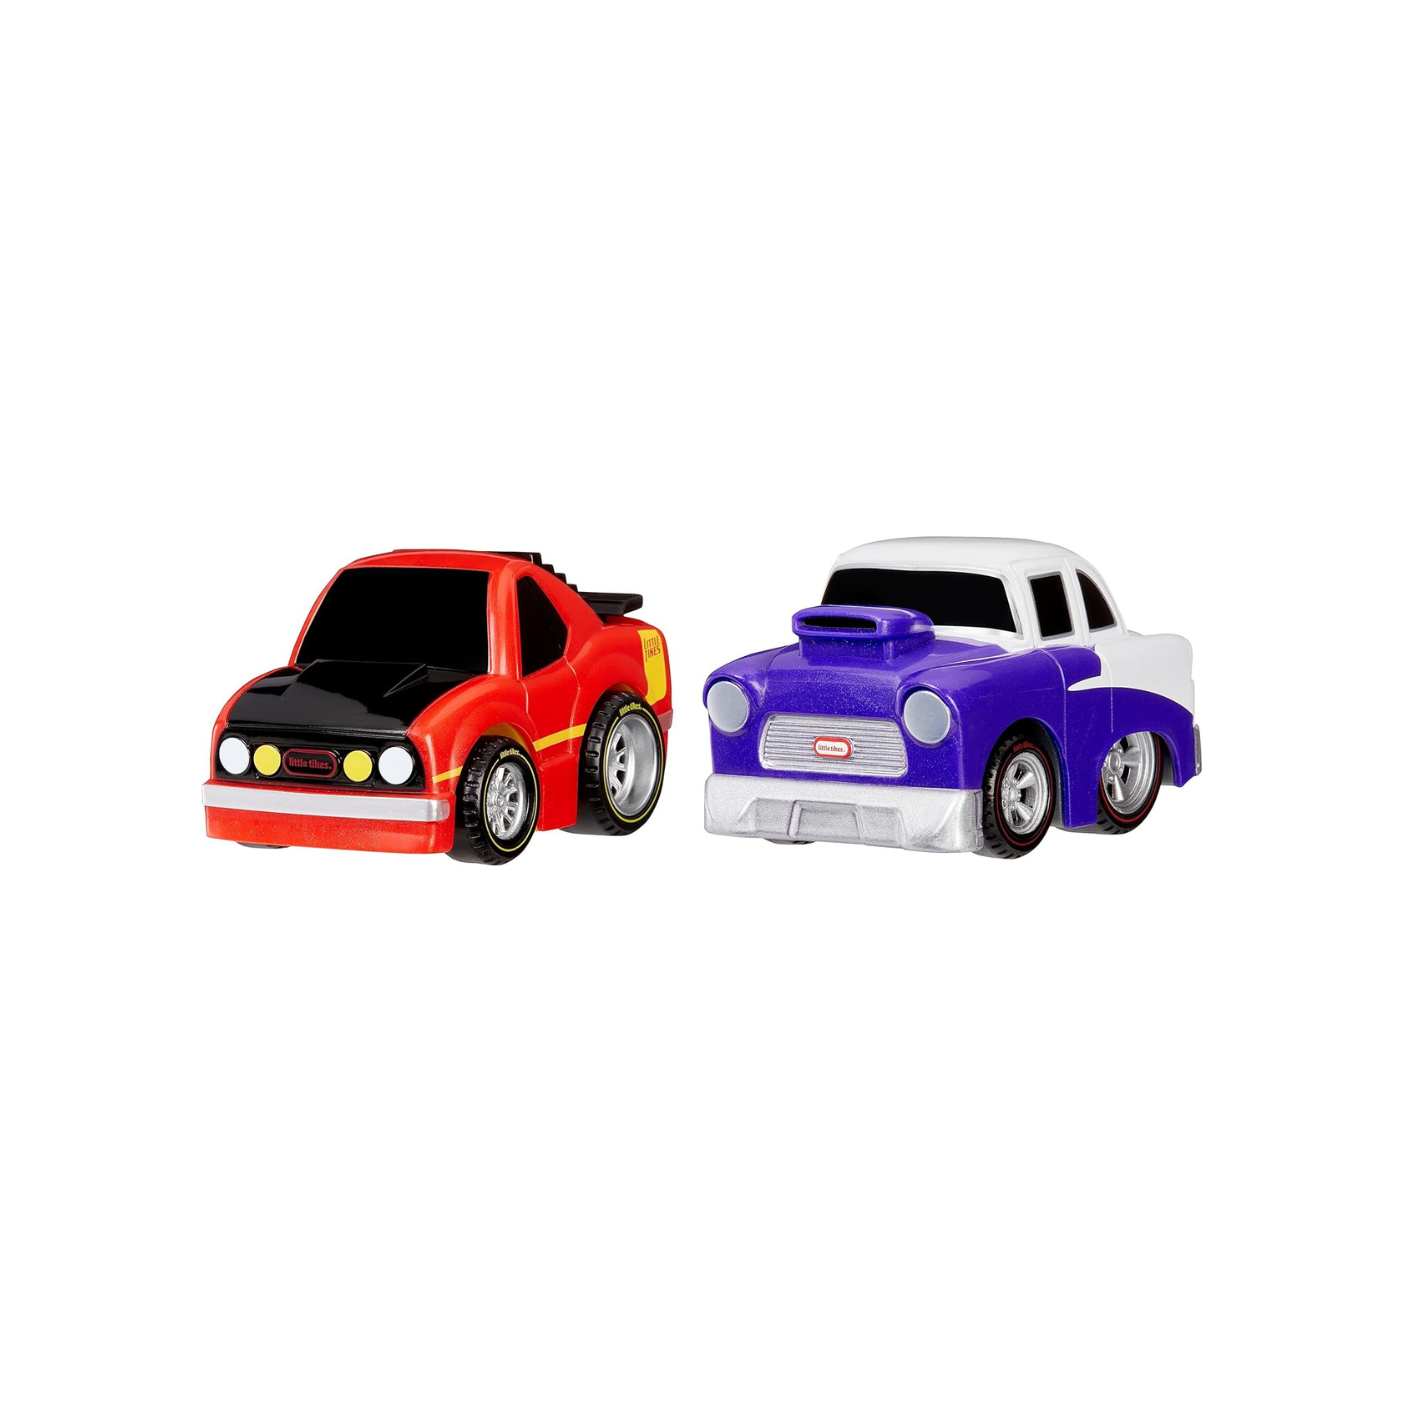 Little Tikes Crazy Pullback Fast Cars Goes up to 50 ft (2 Pack)